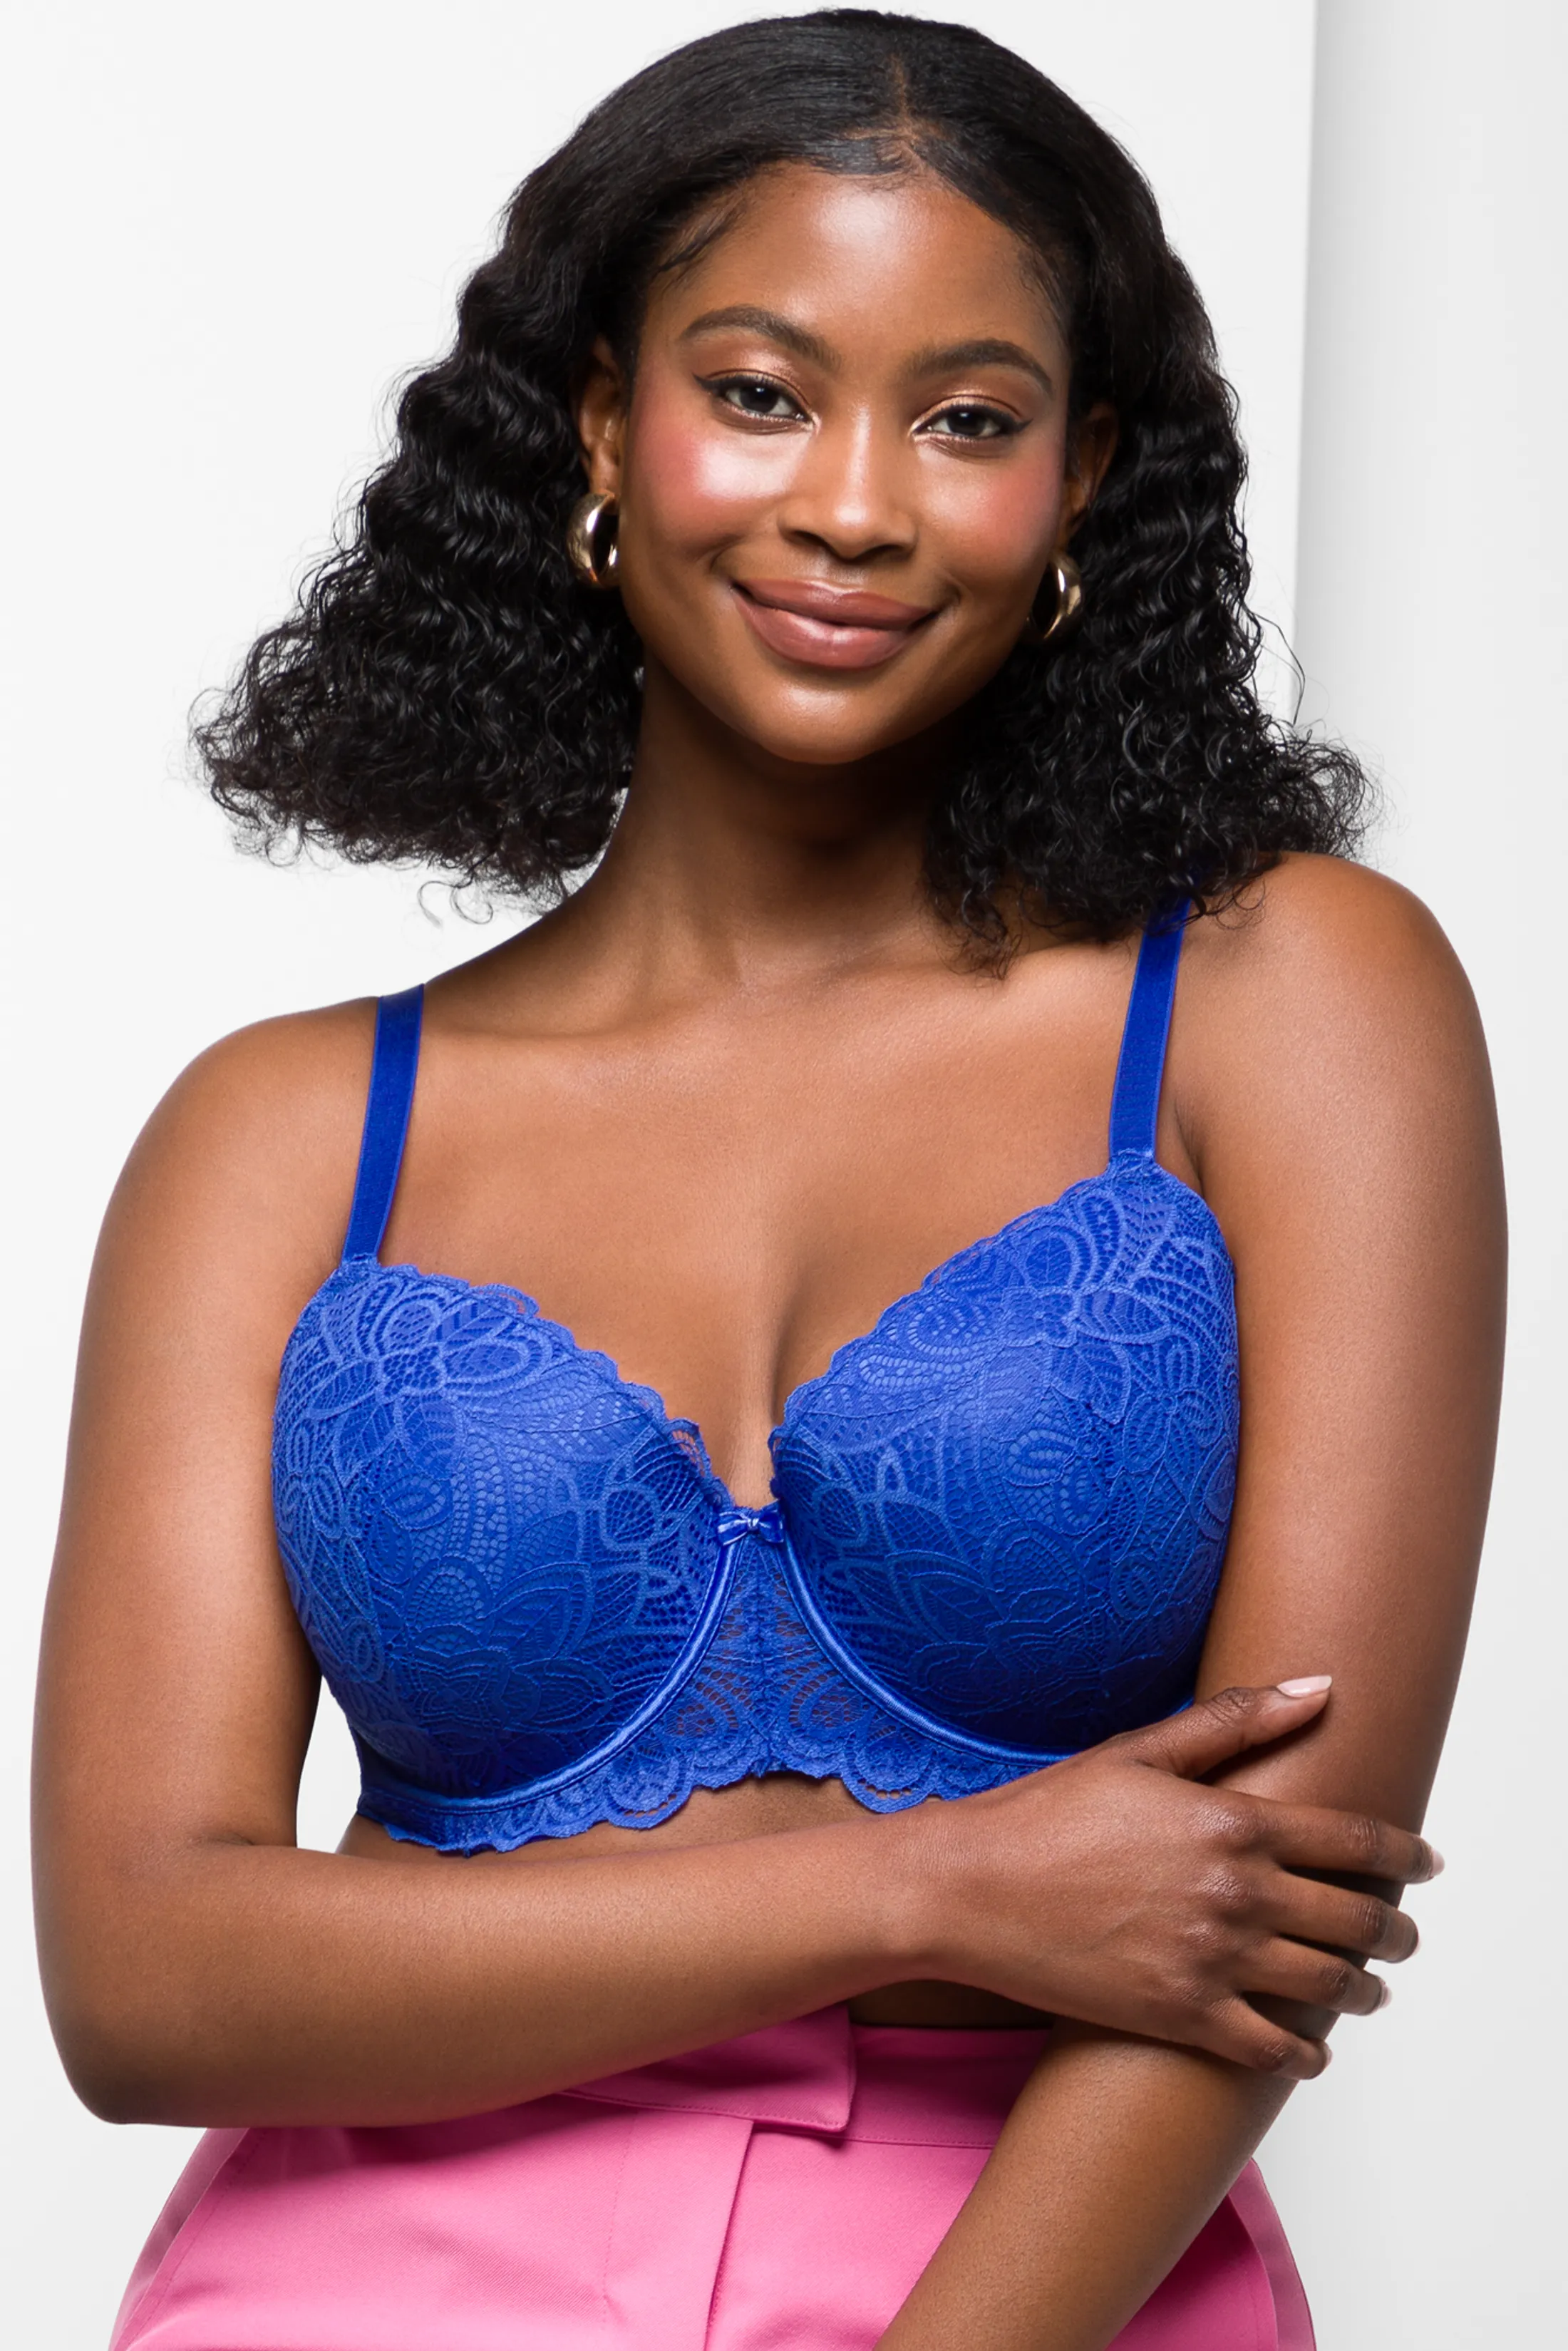 Ackermans Bigger Bra Sizes And Plus Size Bras In South Africa